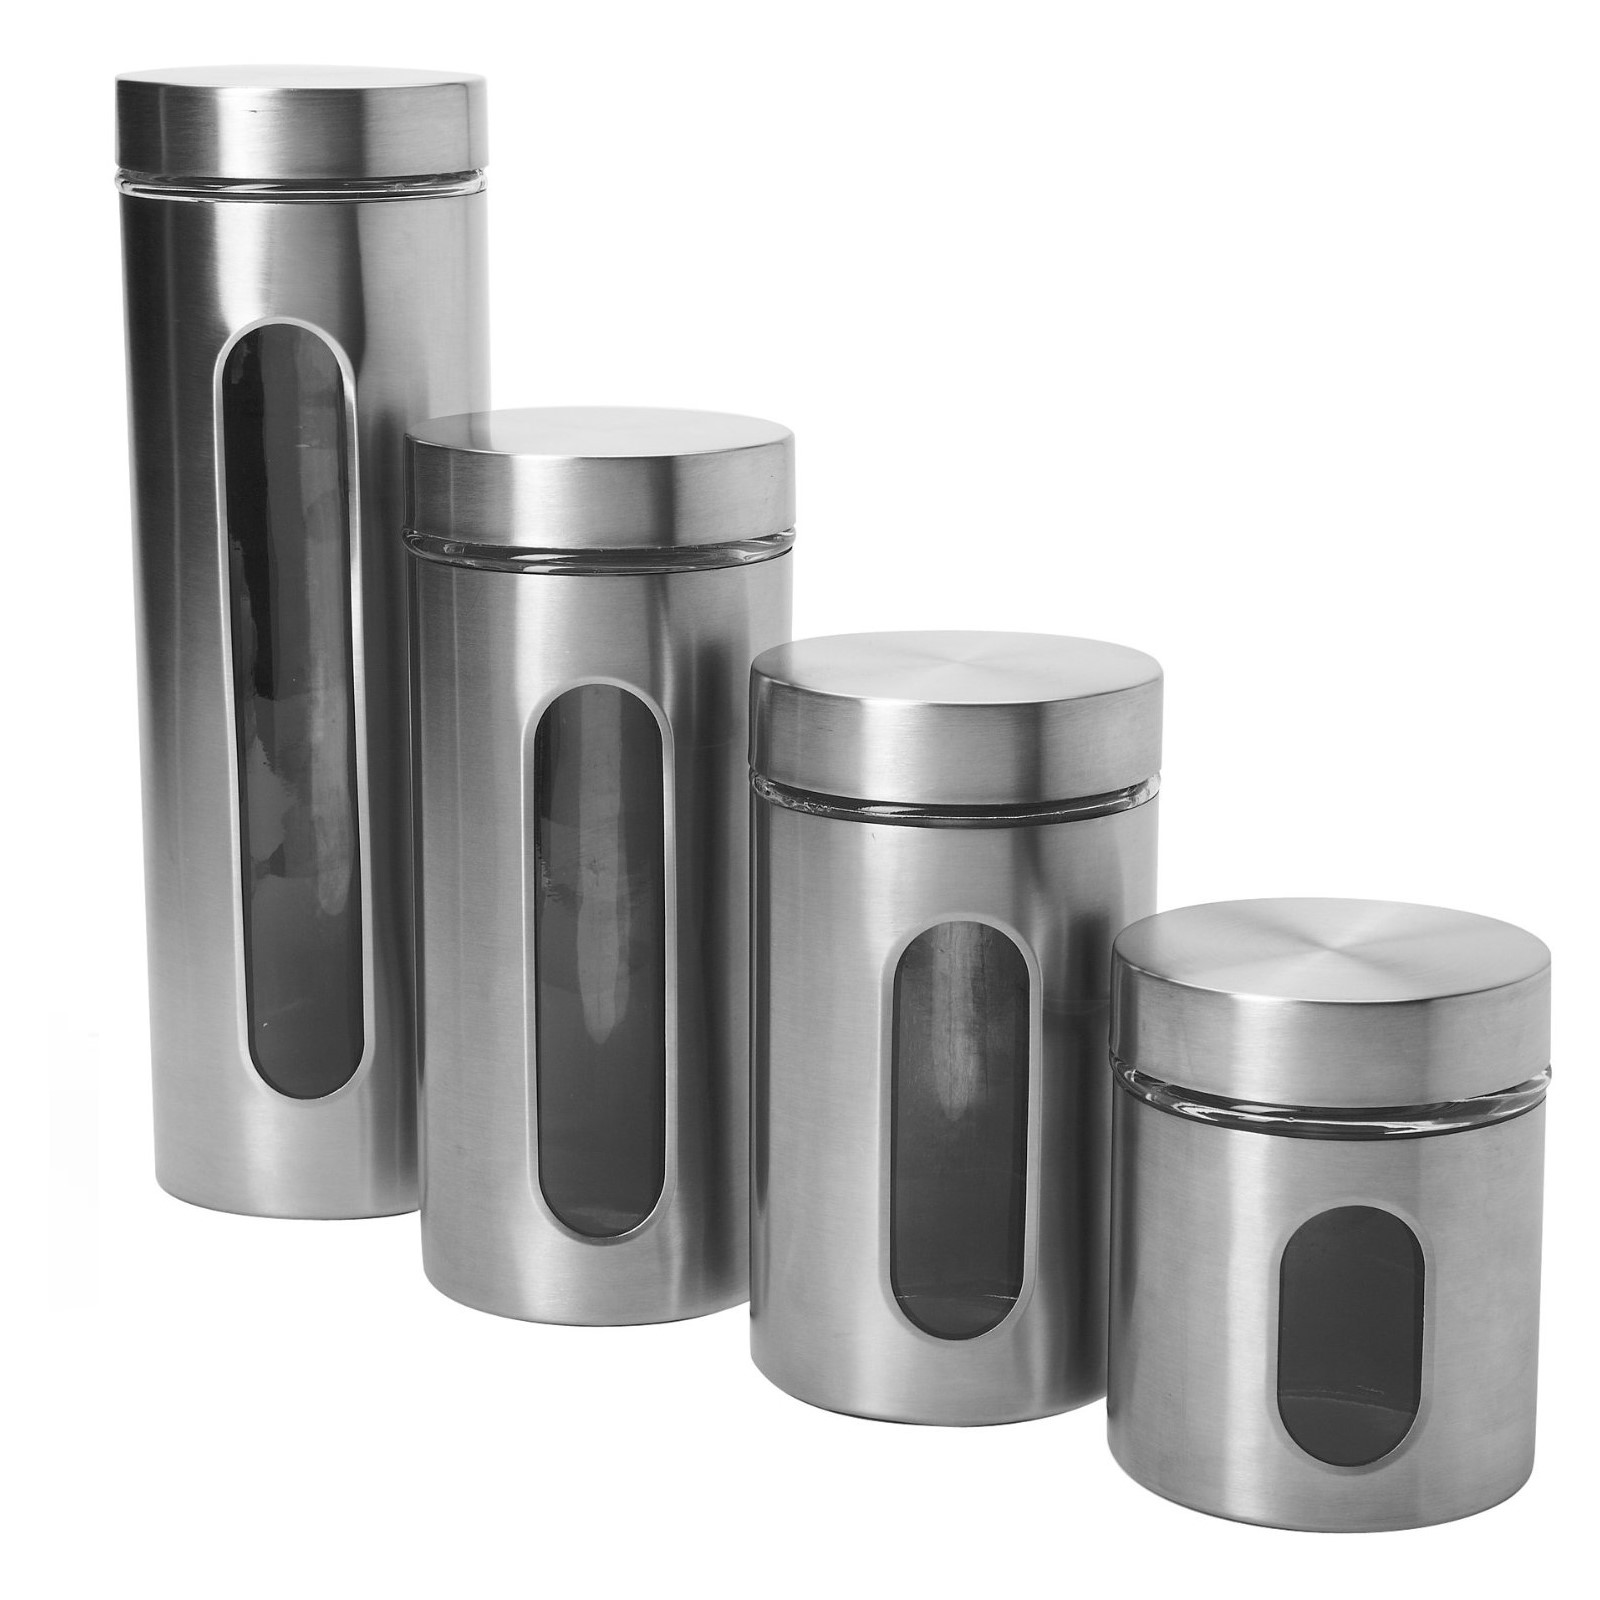 Anchor Hocking Food Canisters 4-Piece Palladian Window Set in Stainless Steel 97564A - image 1 of 2